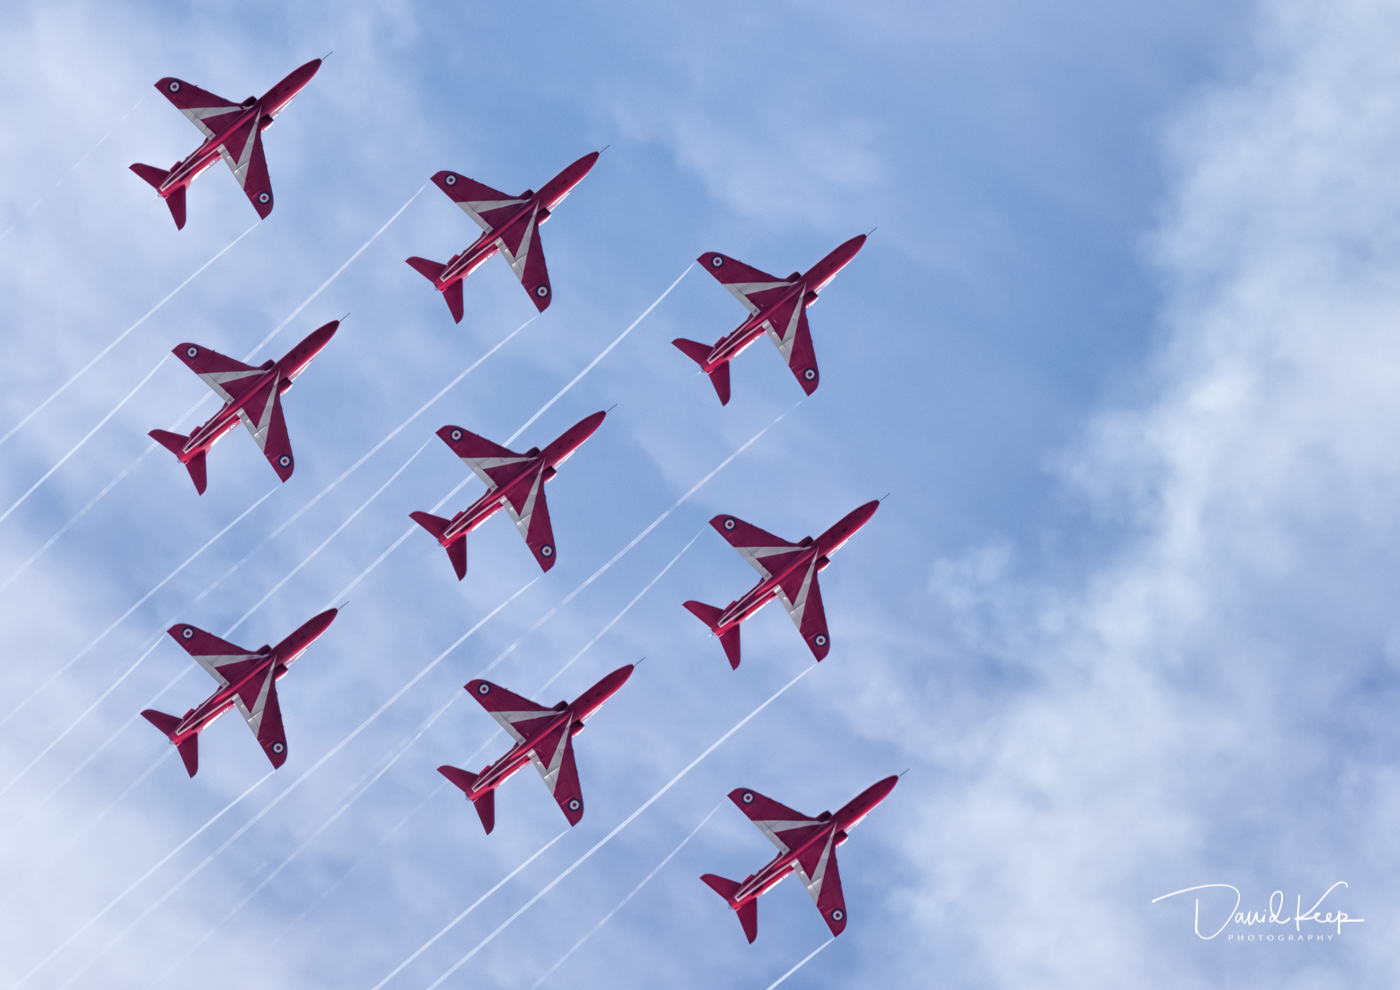 Reds in Formation